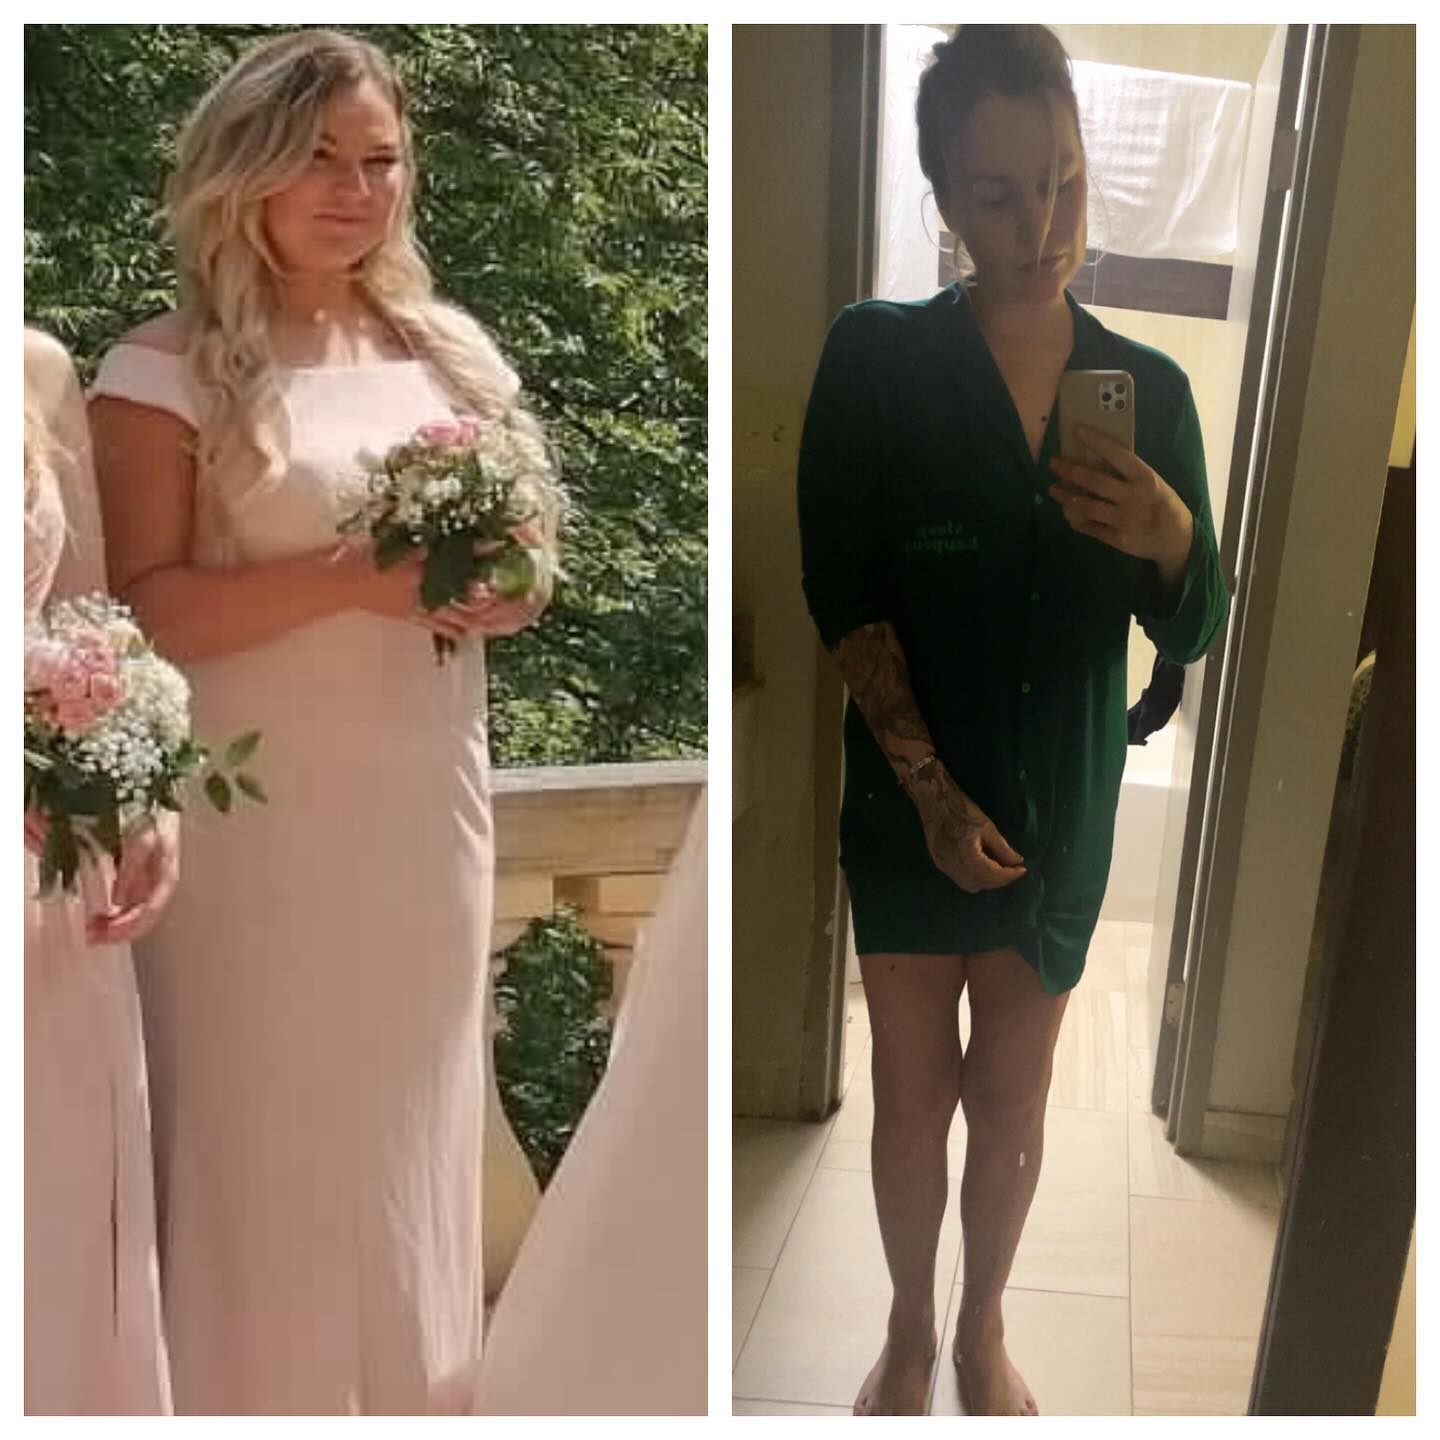 Before you ask, yessss this is me in both pictures. 

We all fall off sometimes, but get up, put it in your past and get working towards your goal. 

My key to this transformation? 

I finally quit drinking. That’s it. 

I struggled with an alcohöl addiction for so long and I’m finally free! I’m here to talk to anyone that may be struggling with it as well. It’s hard and it seems impossible, but I promise it’s worth it 🩷 the funny thing is, I wasn’t even eating in the picture on the left. Like AT ALL. The bloated face and extra fat was literally just from drinking. 

It took me almost dying to get my life together 😅 in the ICU for two weeks, but I made it! 

I still do online training! Email me for your spot! ❤️ 
✨GUNMAMIFIT@GMAIL.COM✨
#onlinetraining #weightlossjourney #weightlosstransformation #weightlosstips #alcoholmarkers #beforeandafter #gunmami #personaltrainer #workworkworkworkwork #newyearsresolution #linkinbio #girlswithtattoos #berlin #alcoholicsanonymous #poison